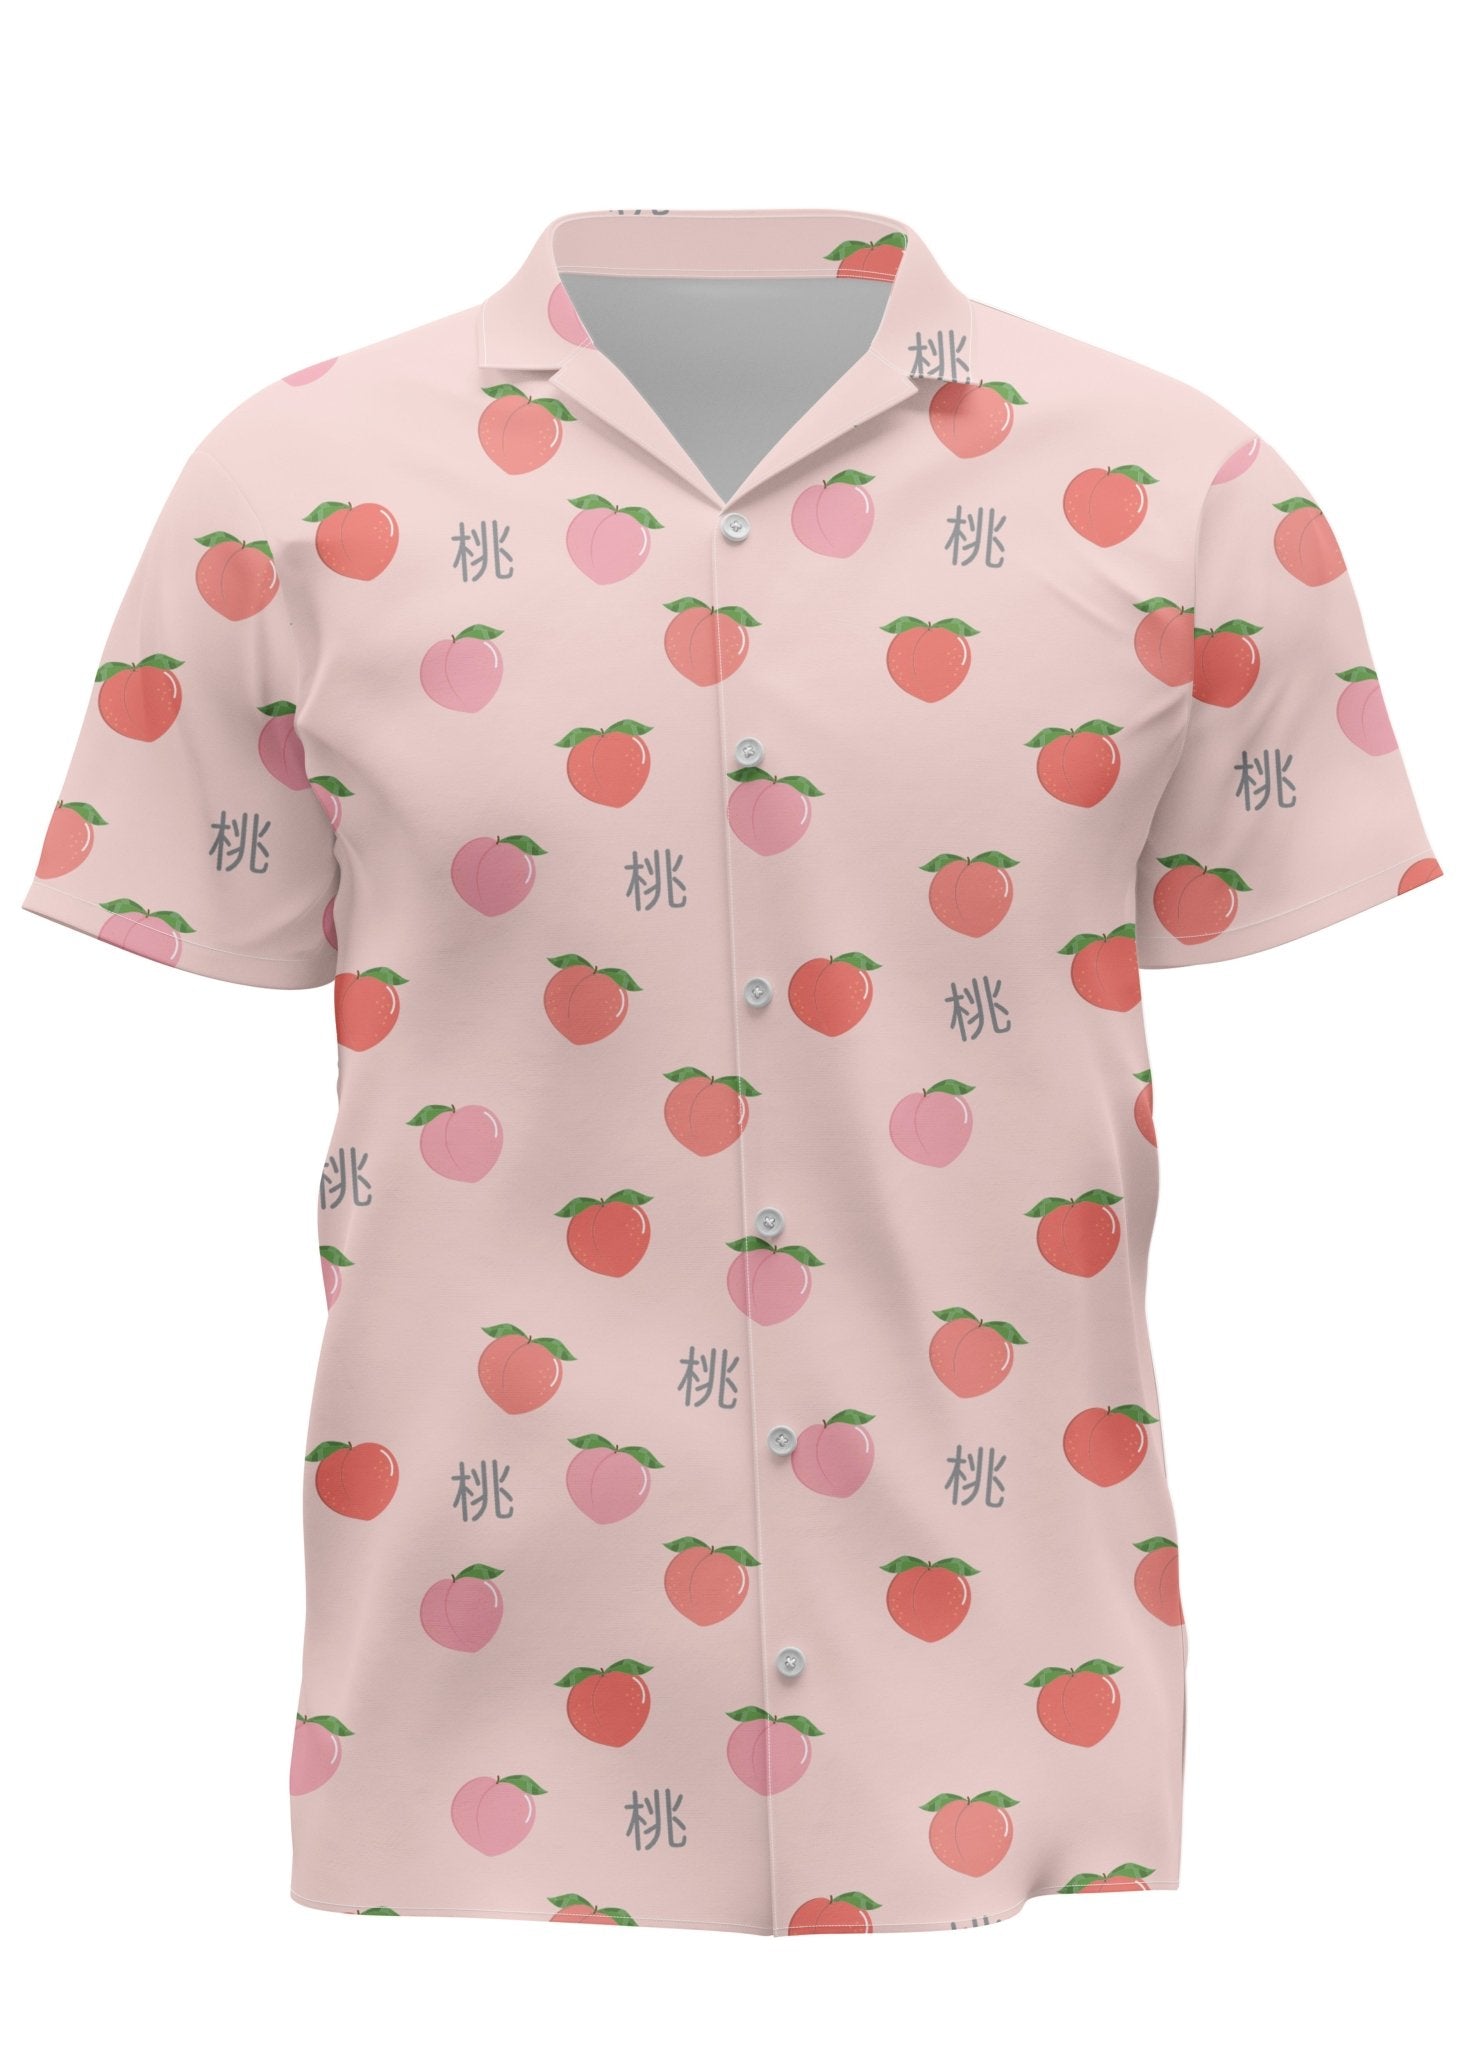 Peachy Delight Short Sleeve Button Up Shirt - In Control Clothing